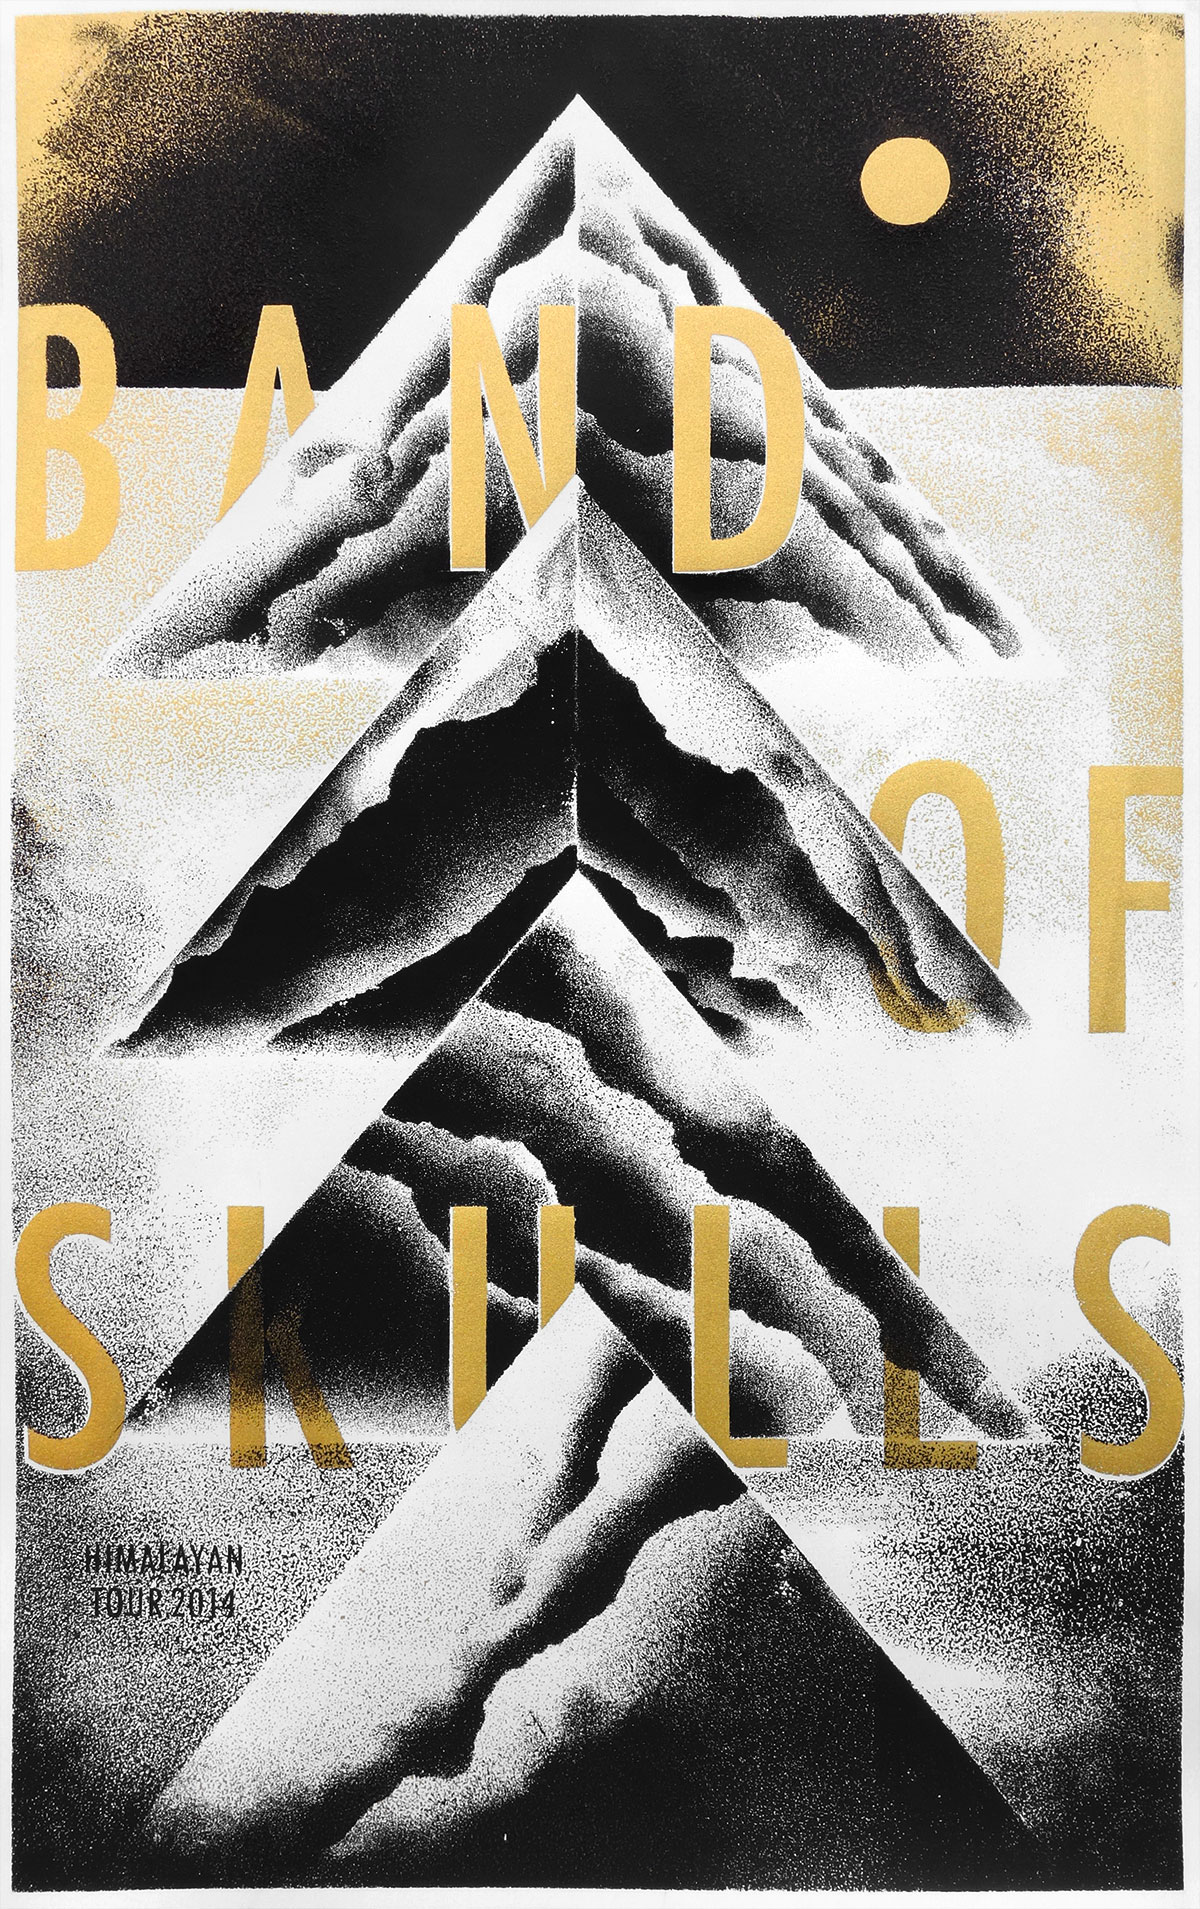 Band Of Skulls gigposter 01 by Rainbow Posters